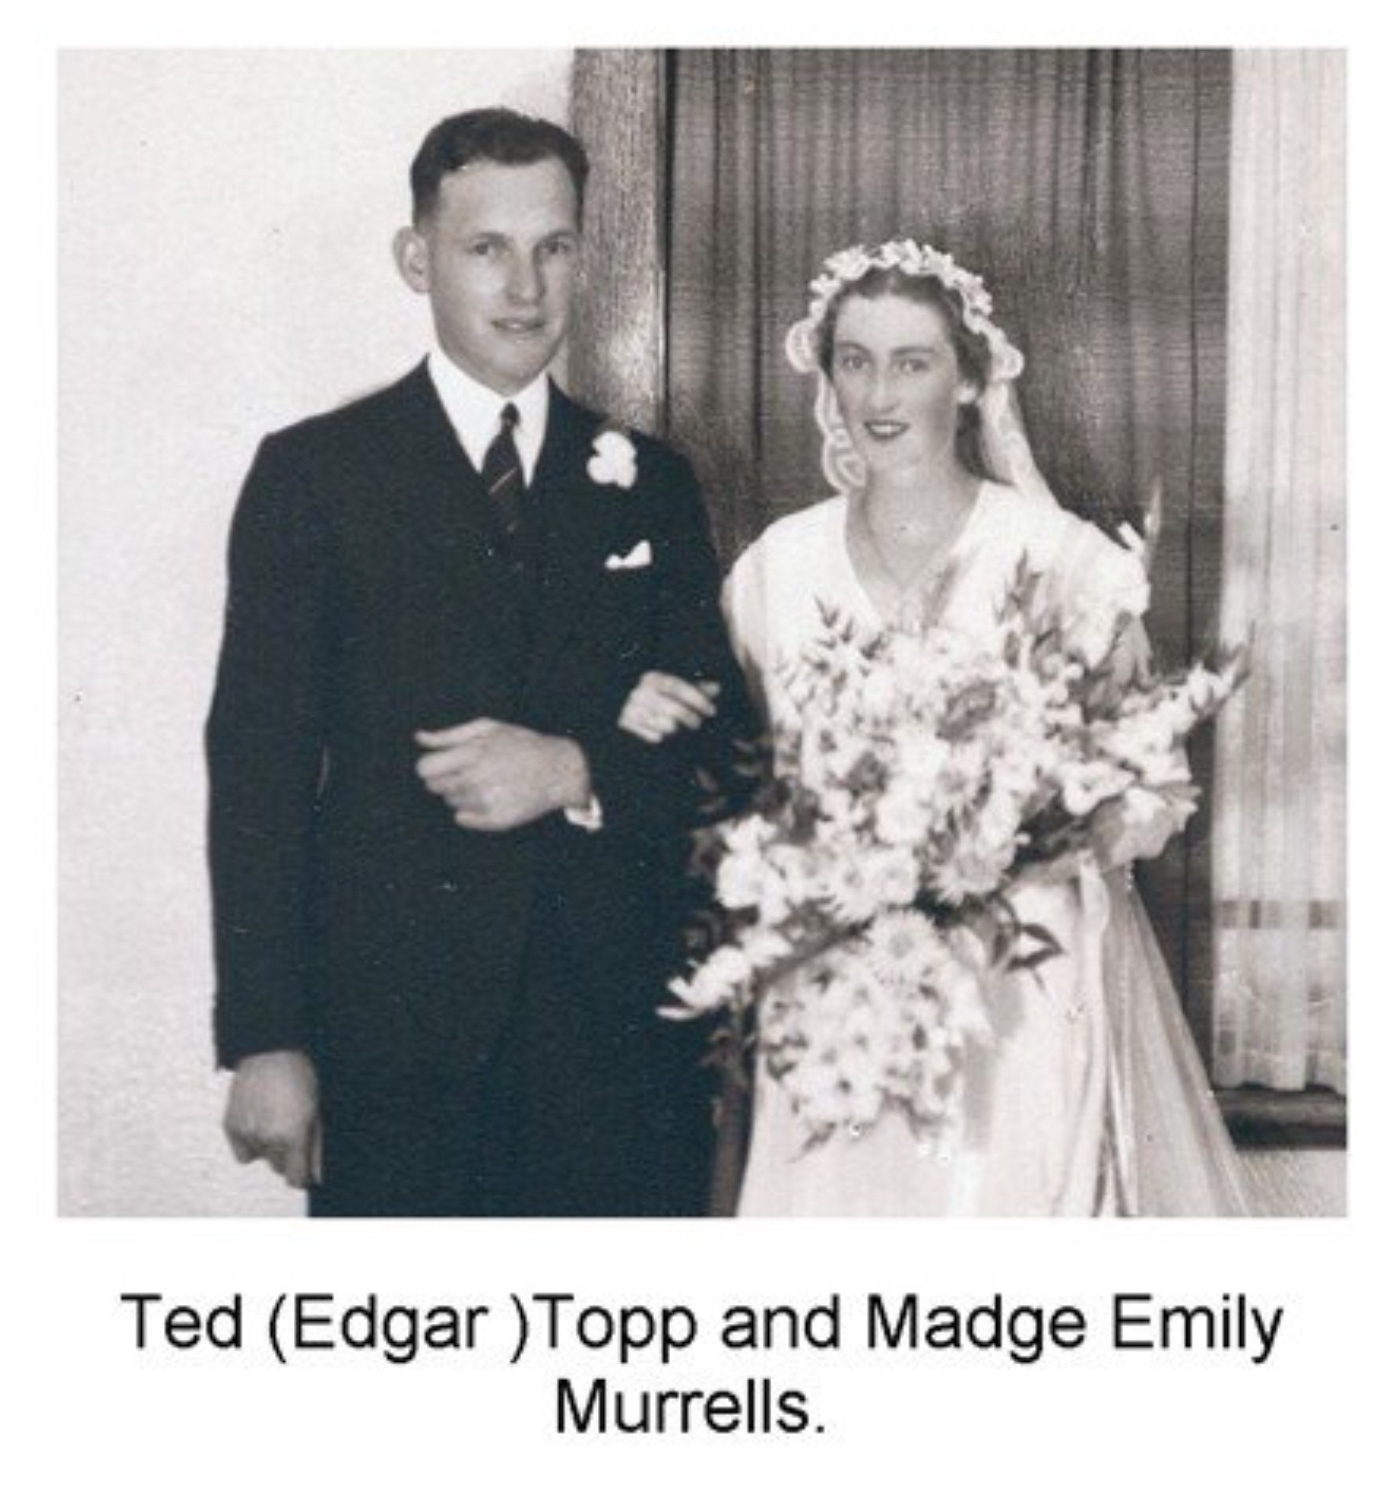 Ted & Madge Topp